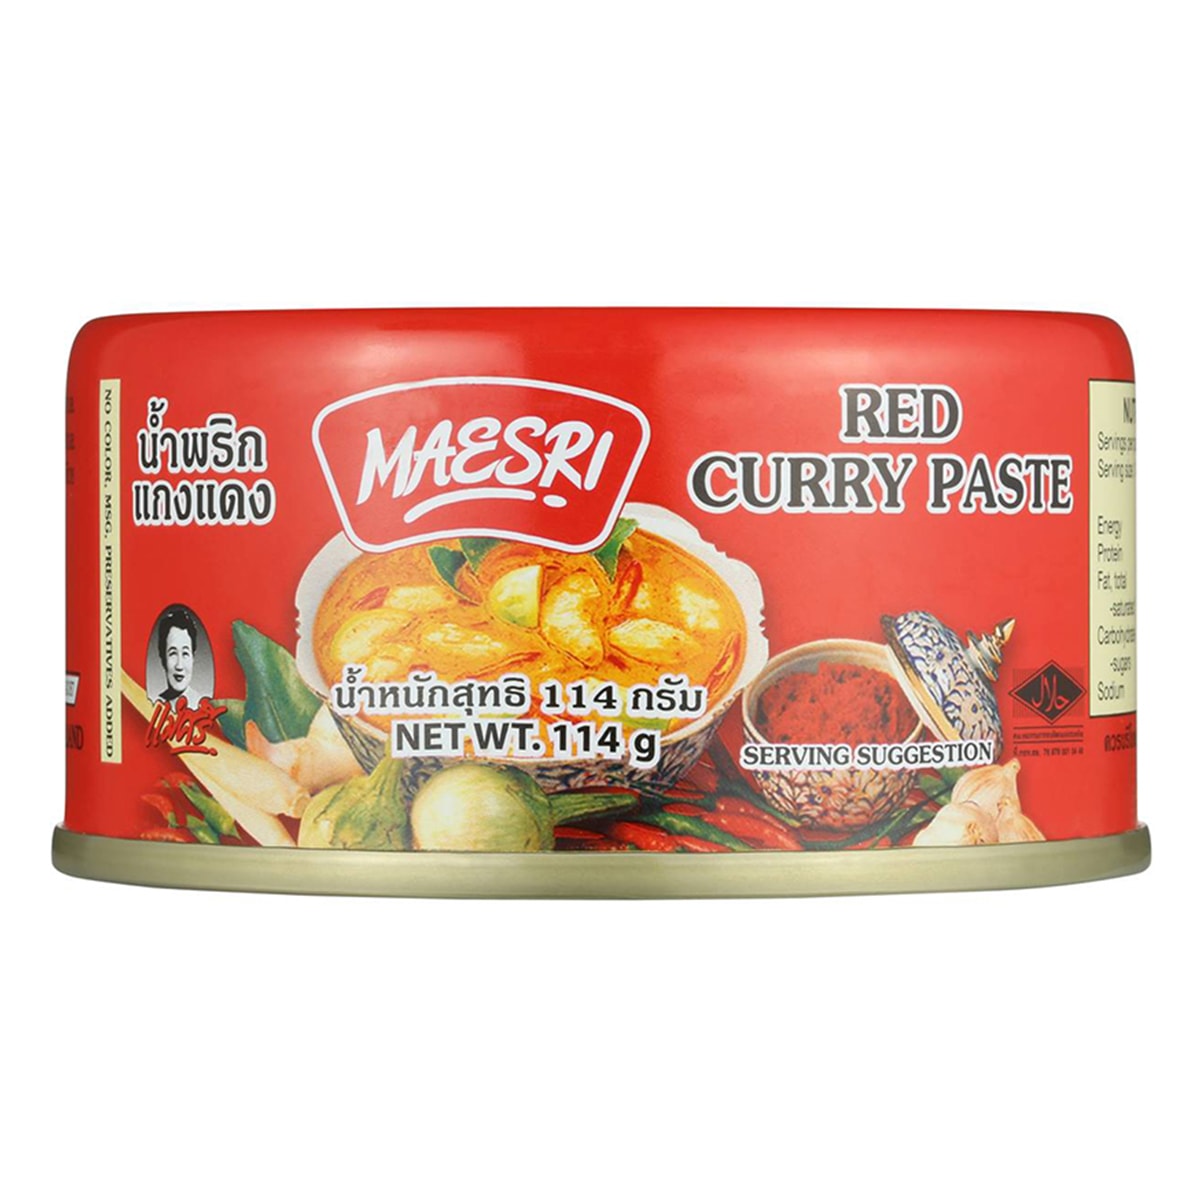 Buy Maesri Red Curry Paste - 114 gm